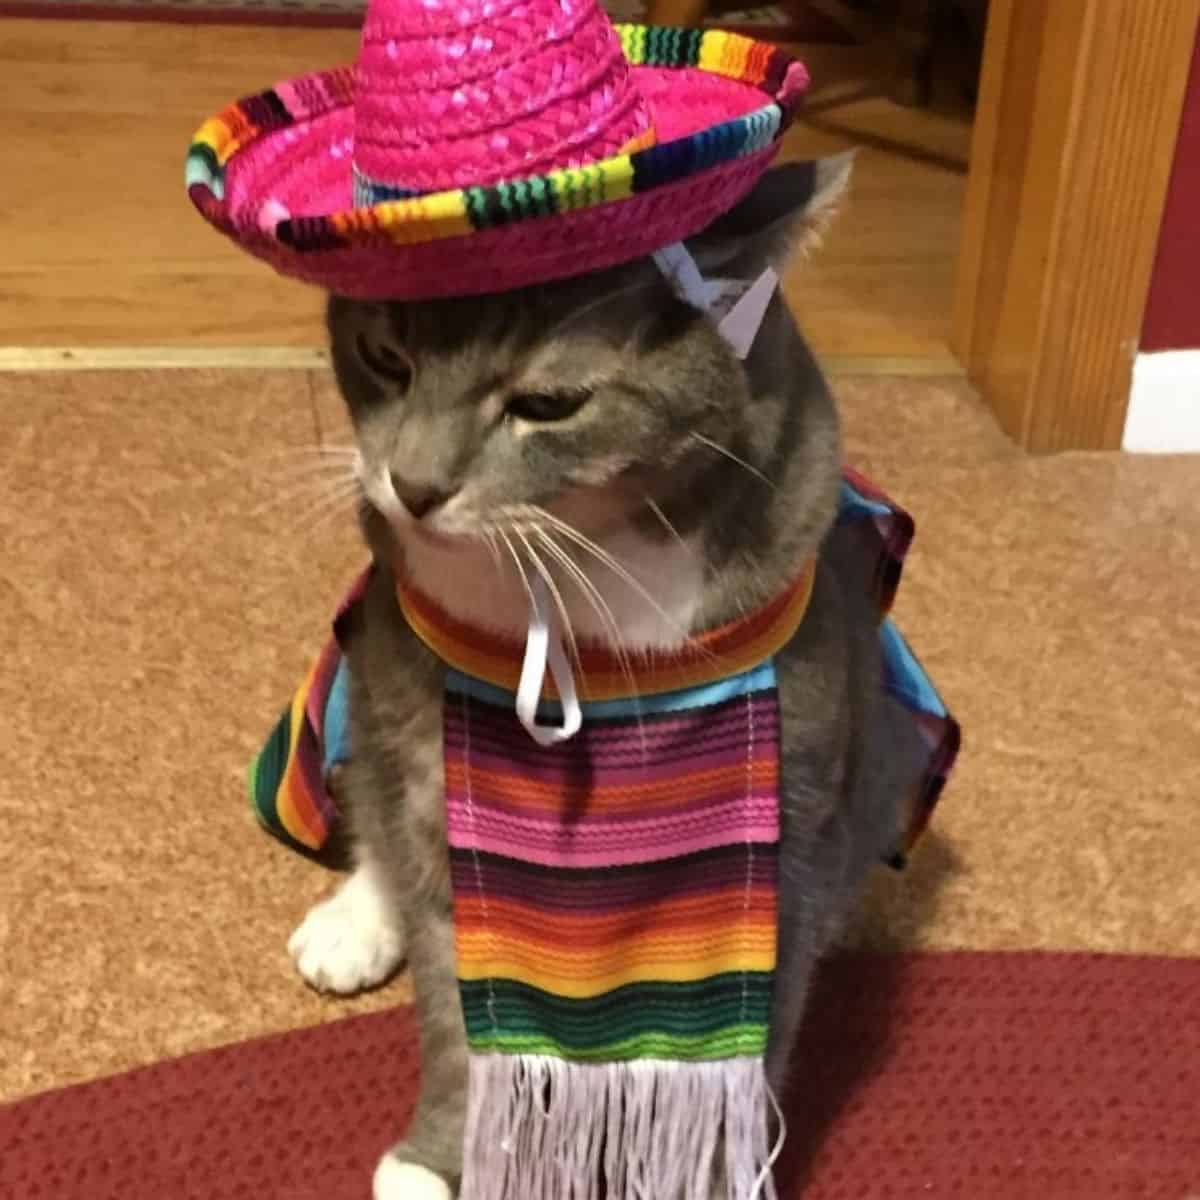 a cat with a colorful hat and a scarf around its neck